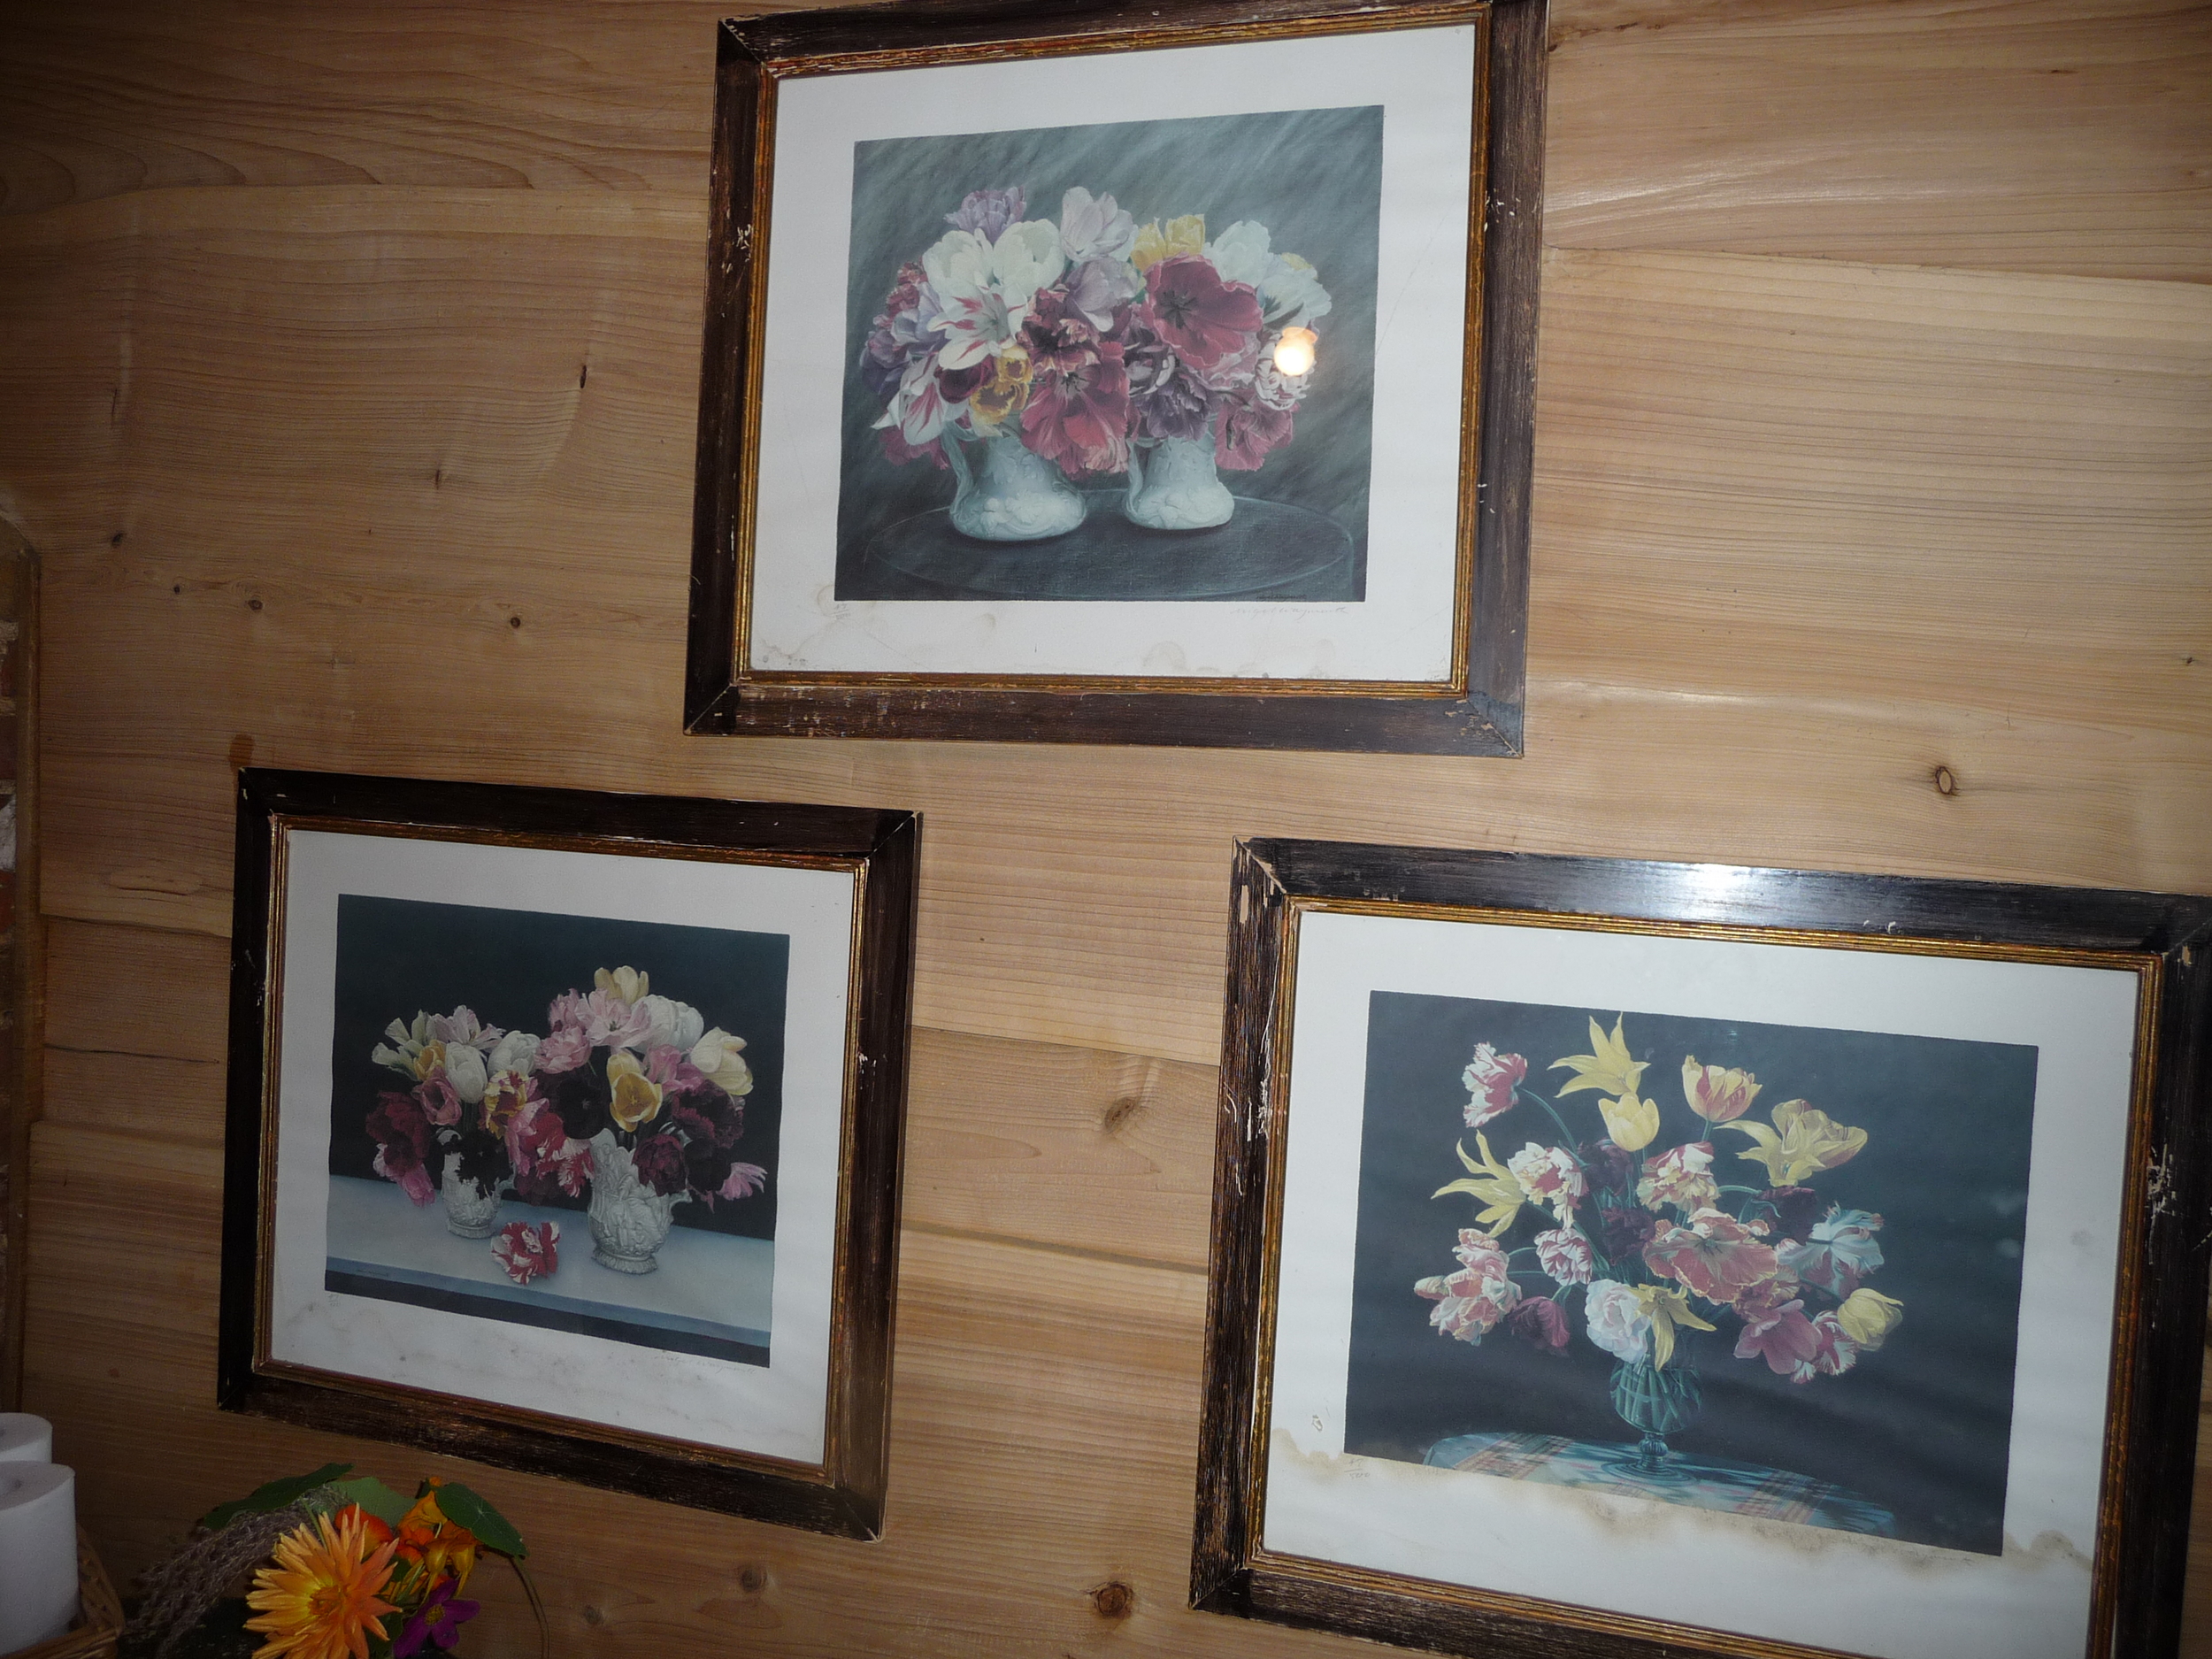  These gems of vintage framed prints are actually in one of the loos!!!&nbsp; I so want to have them in my house!!!! 